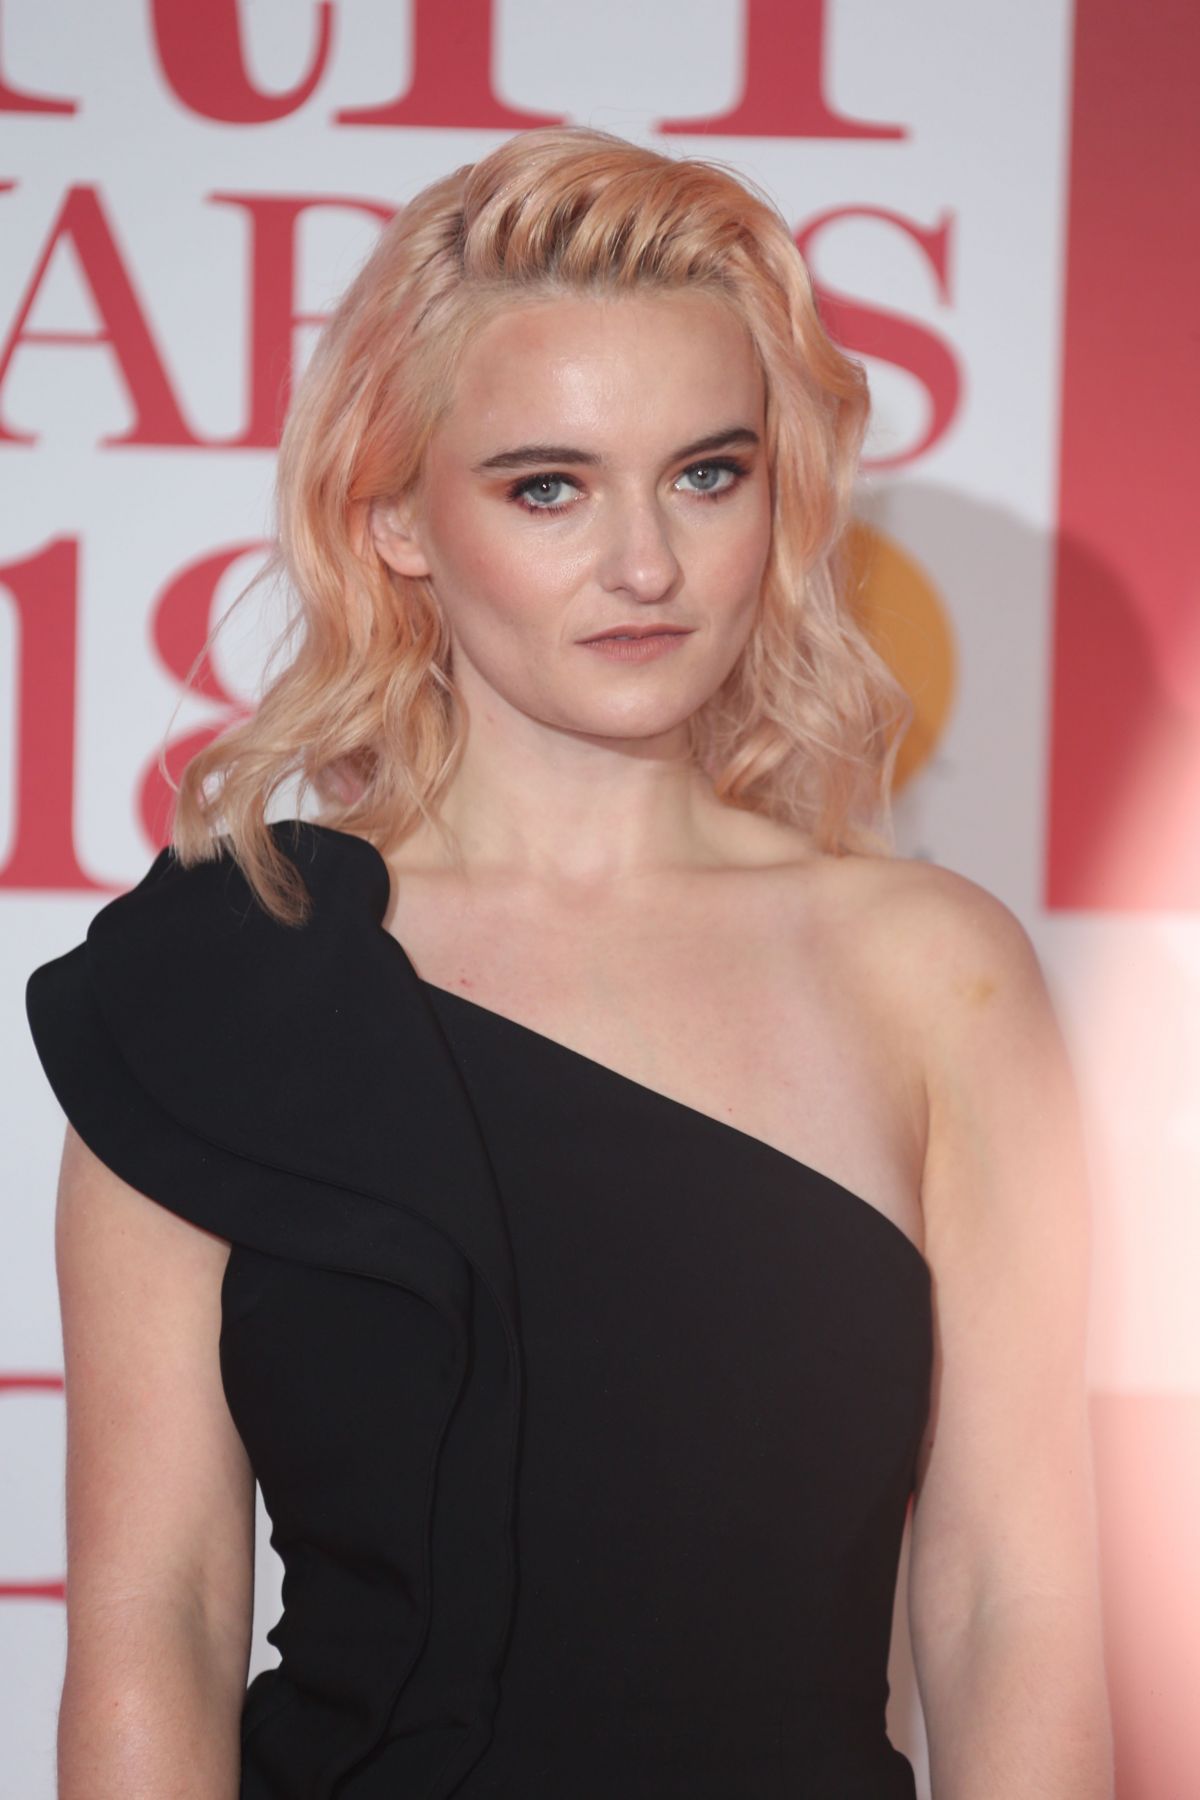 GRACE CHATTO at Brit Awards 2018 in London 02/21/2018 - HawtCelebs1200 x 1800